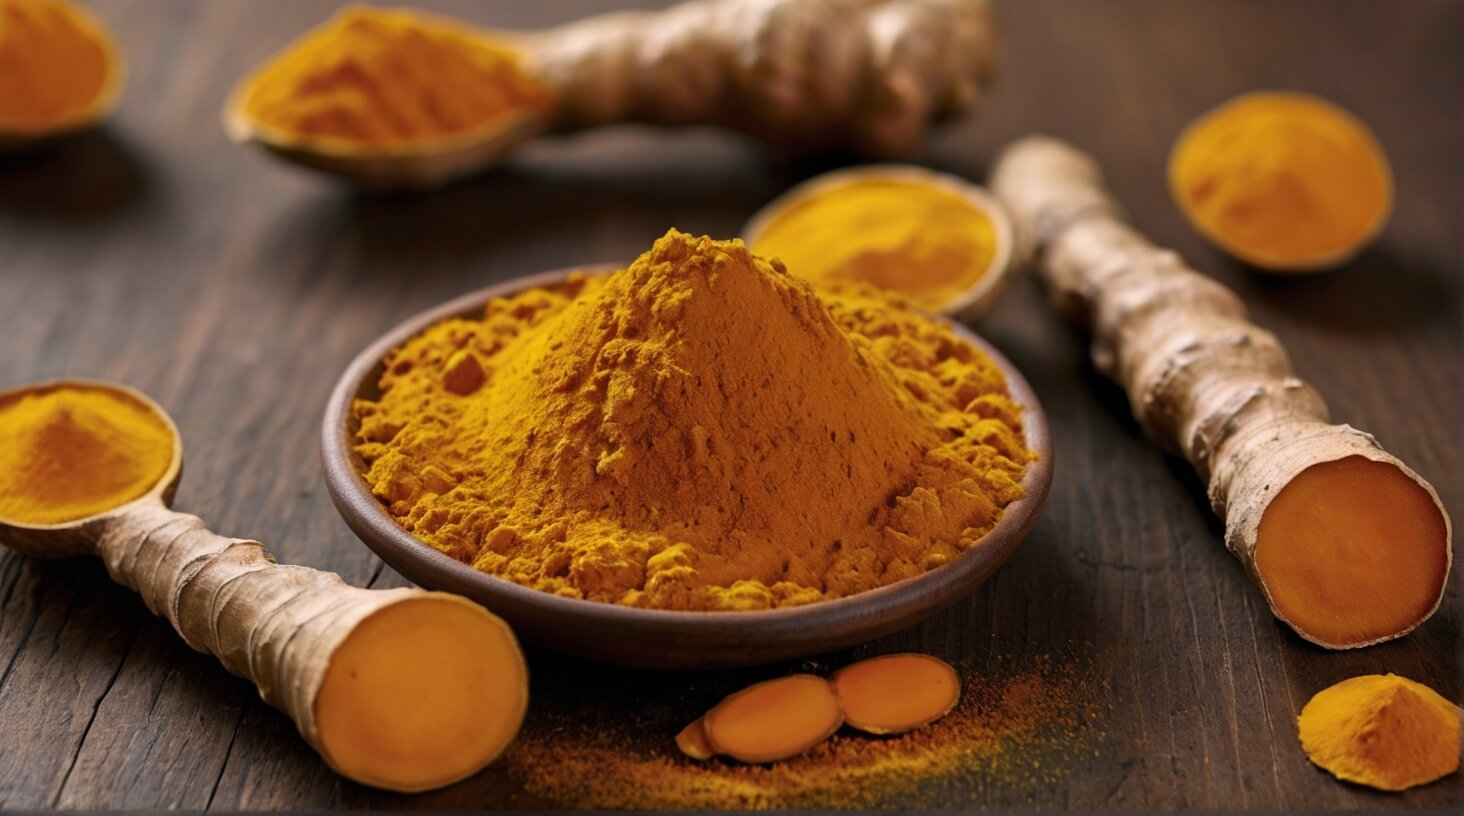 A vibrant yellow spice often used in cooking and known for its health benefits.